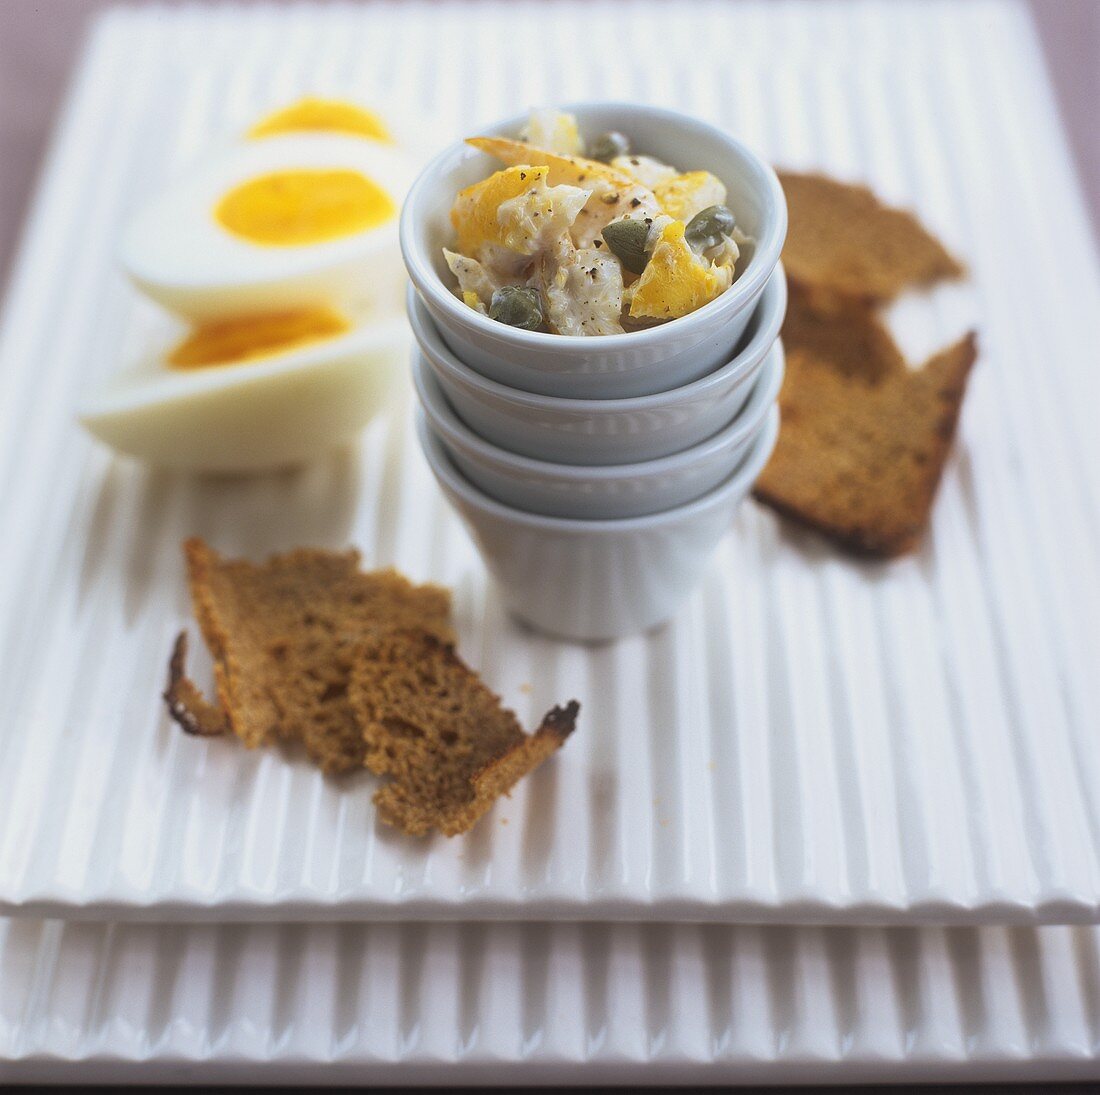 Smoked fish pâté, black bread and boiled eggs